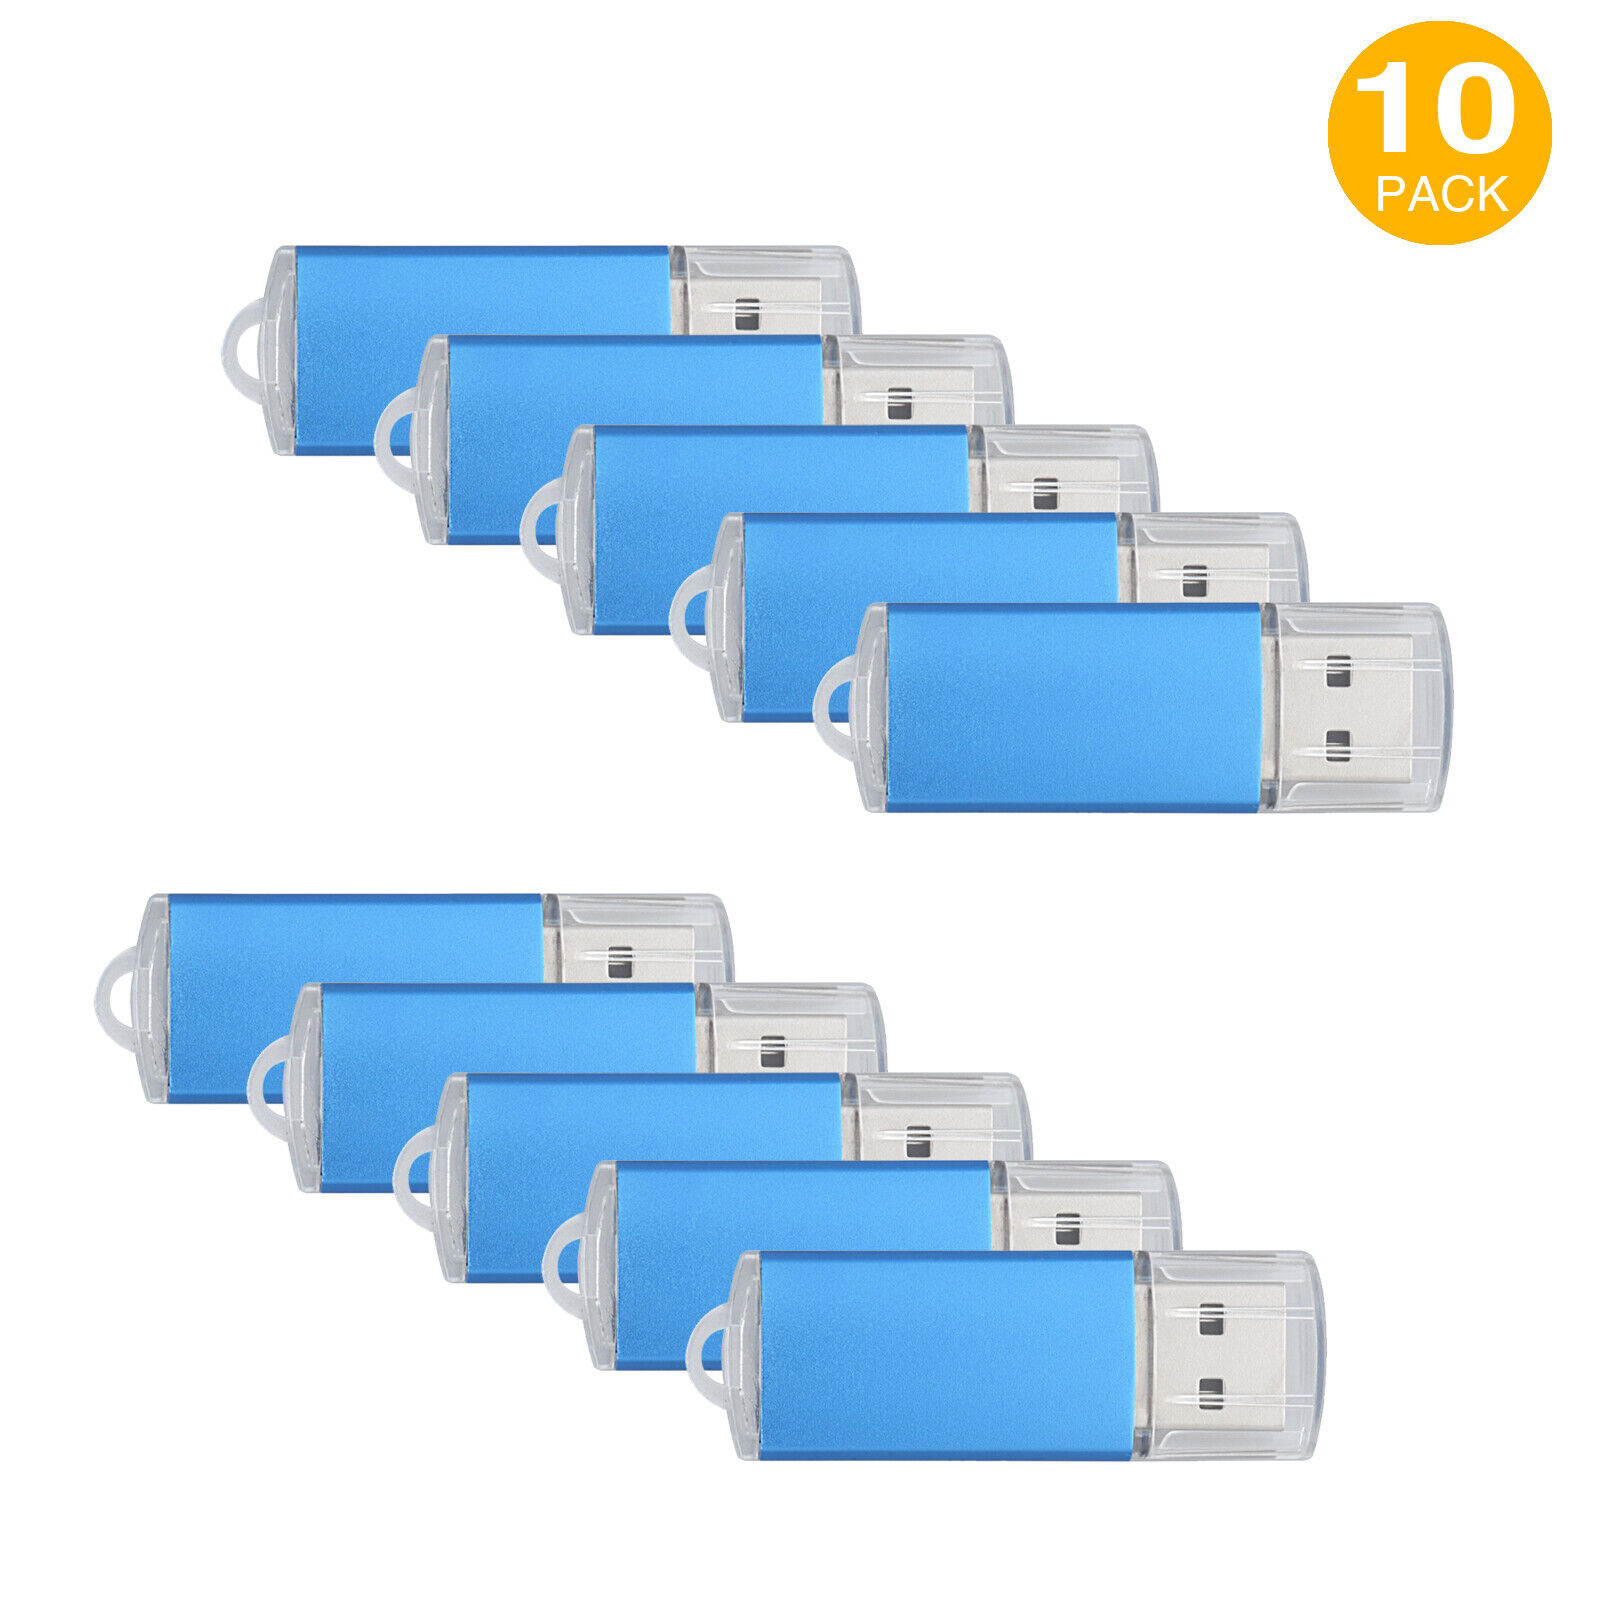 10Pack 16GB USB 2.0 USB Flash Drive High Speed Thumb Drives Memory Stick Storage Kootion Does not apply